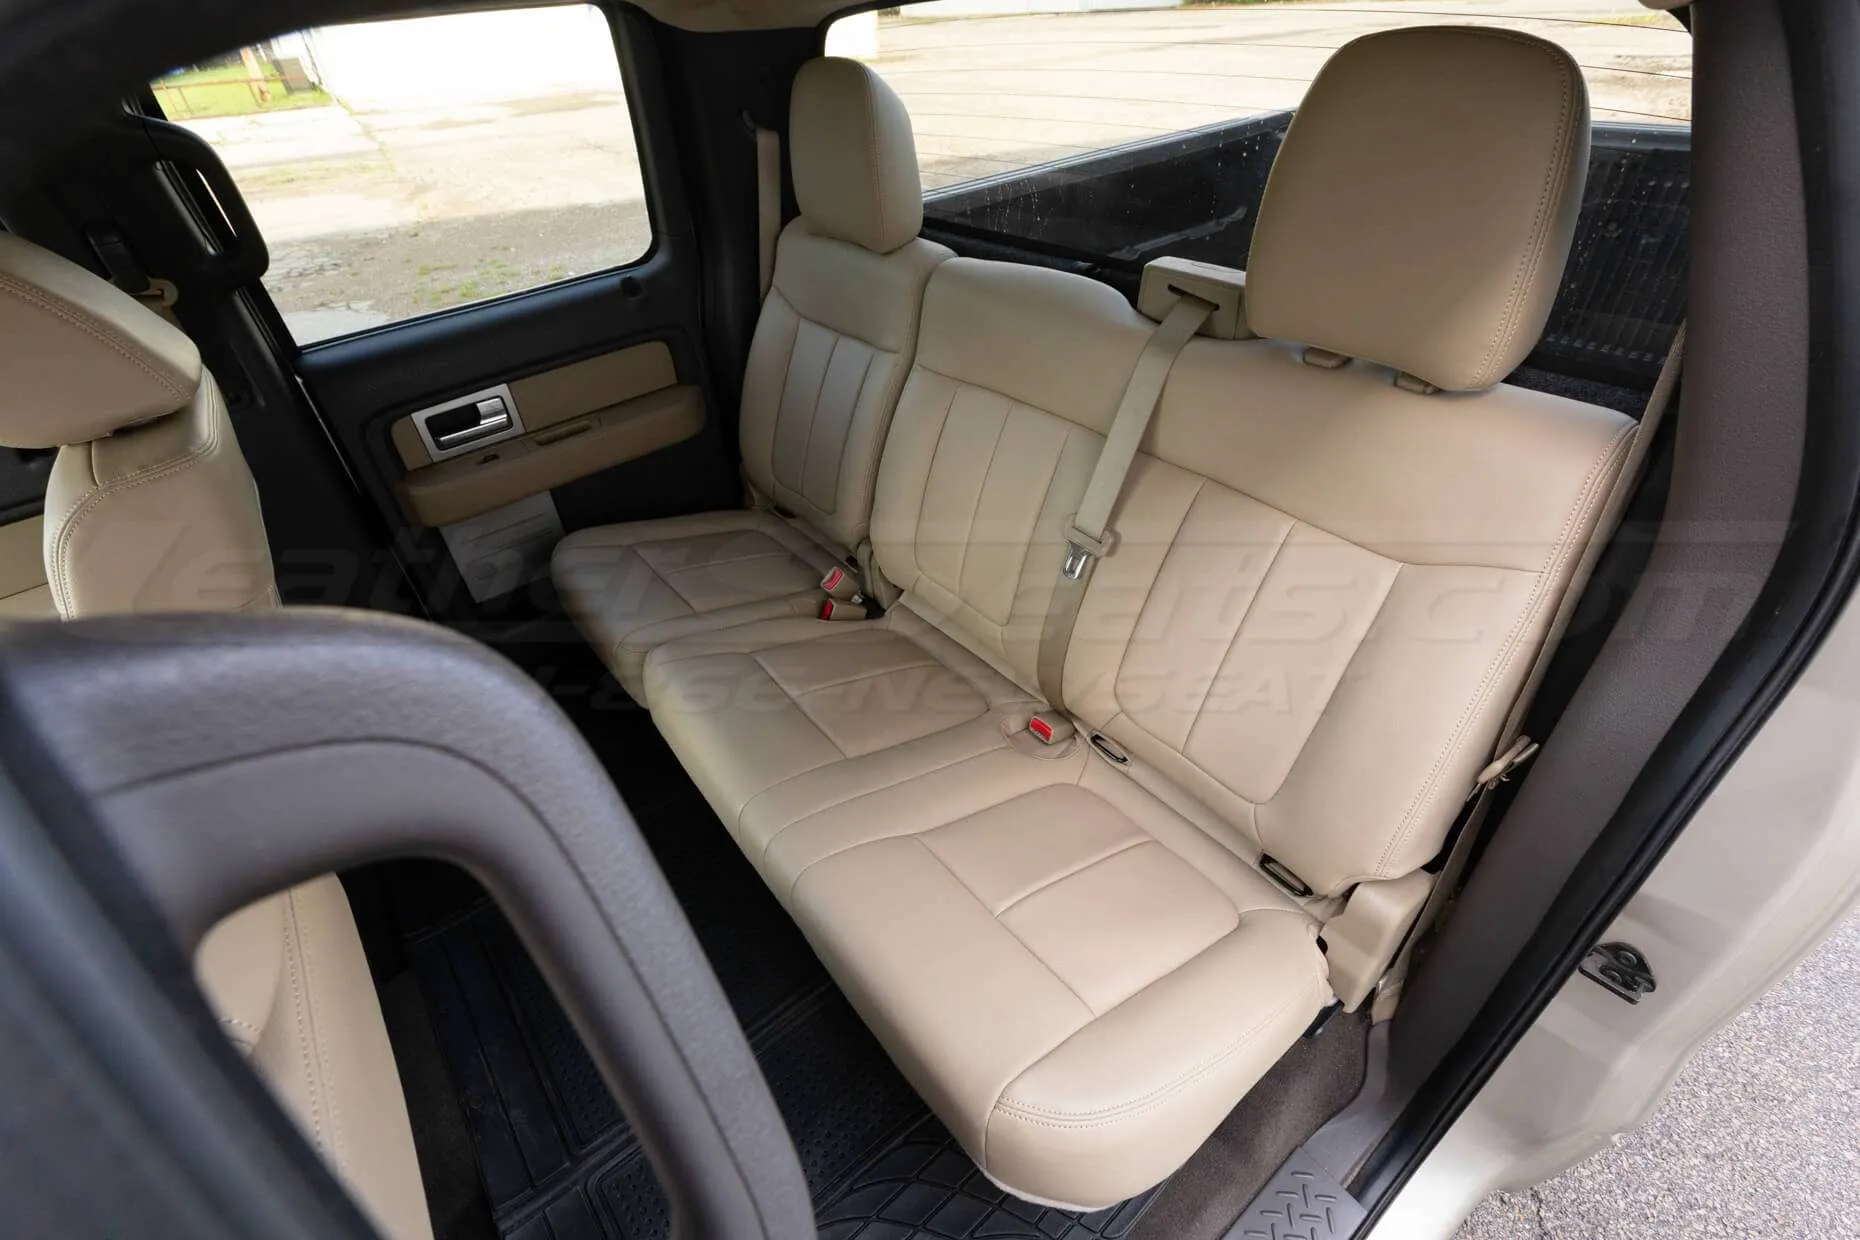 Ford F-150 Leather Upholstery Kit - Sandstone - Installed - Rear seats